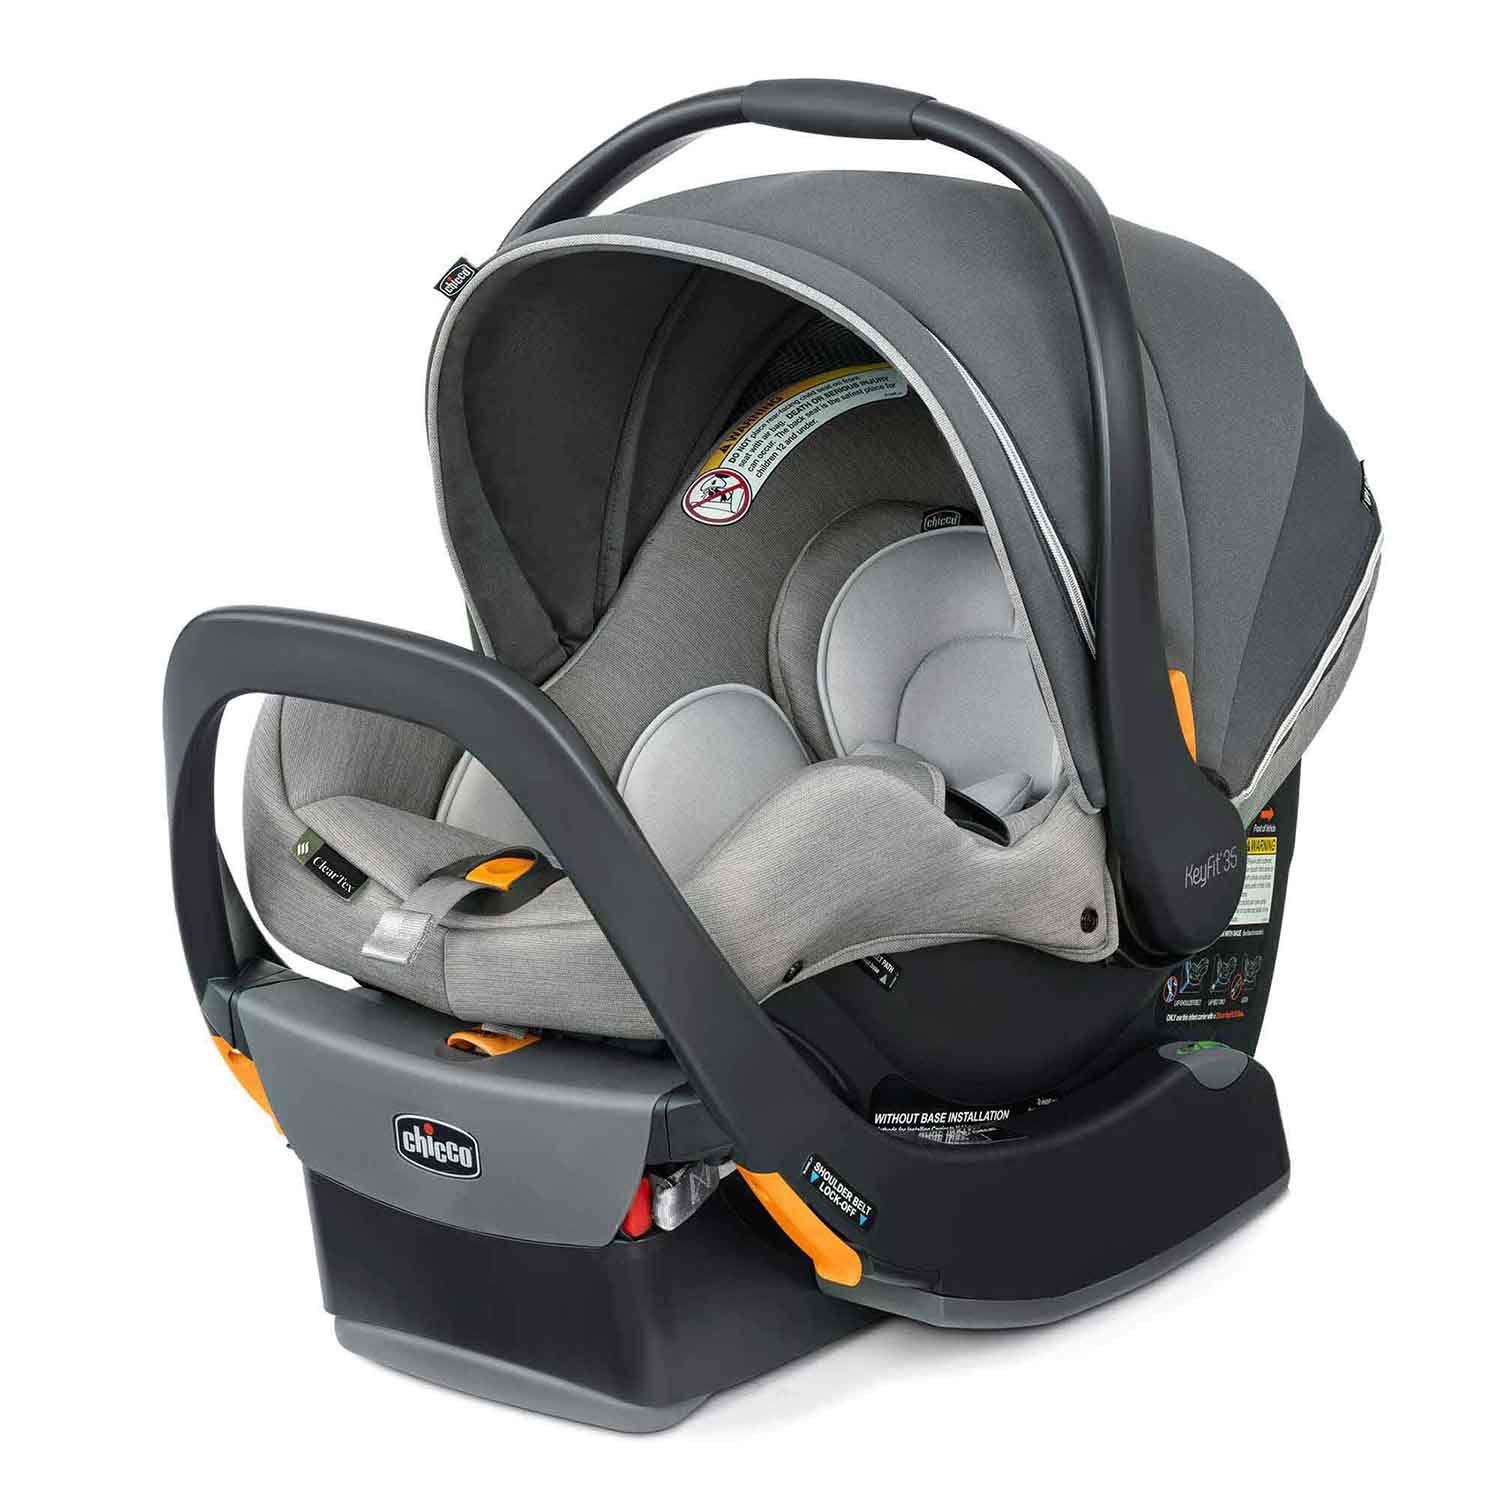 black, grey Infant Car Seat with guard and handle